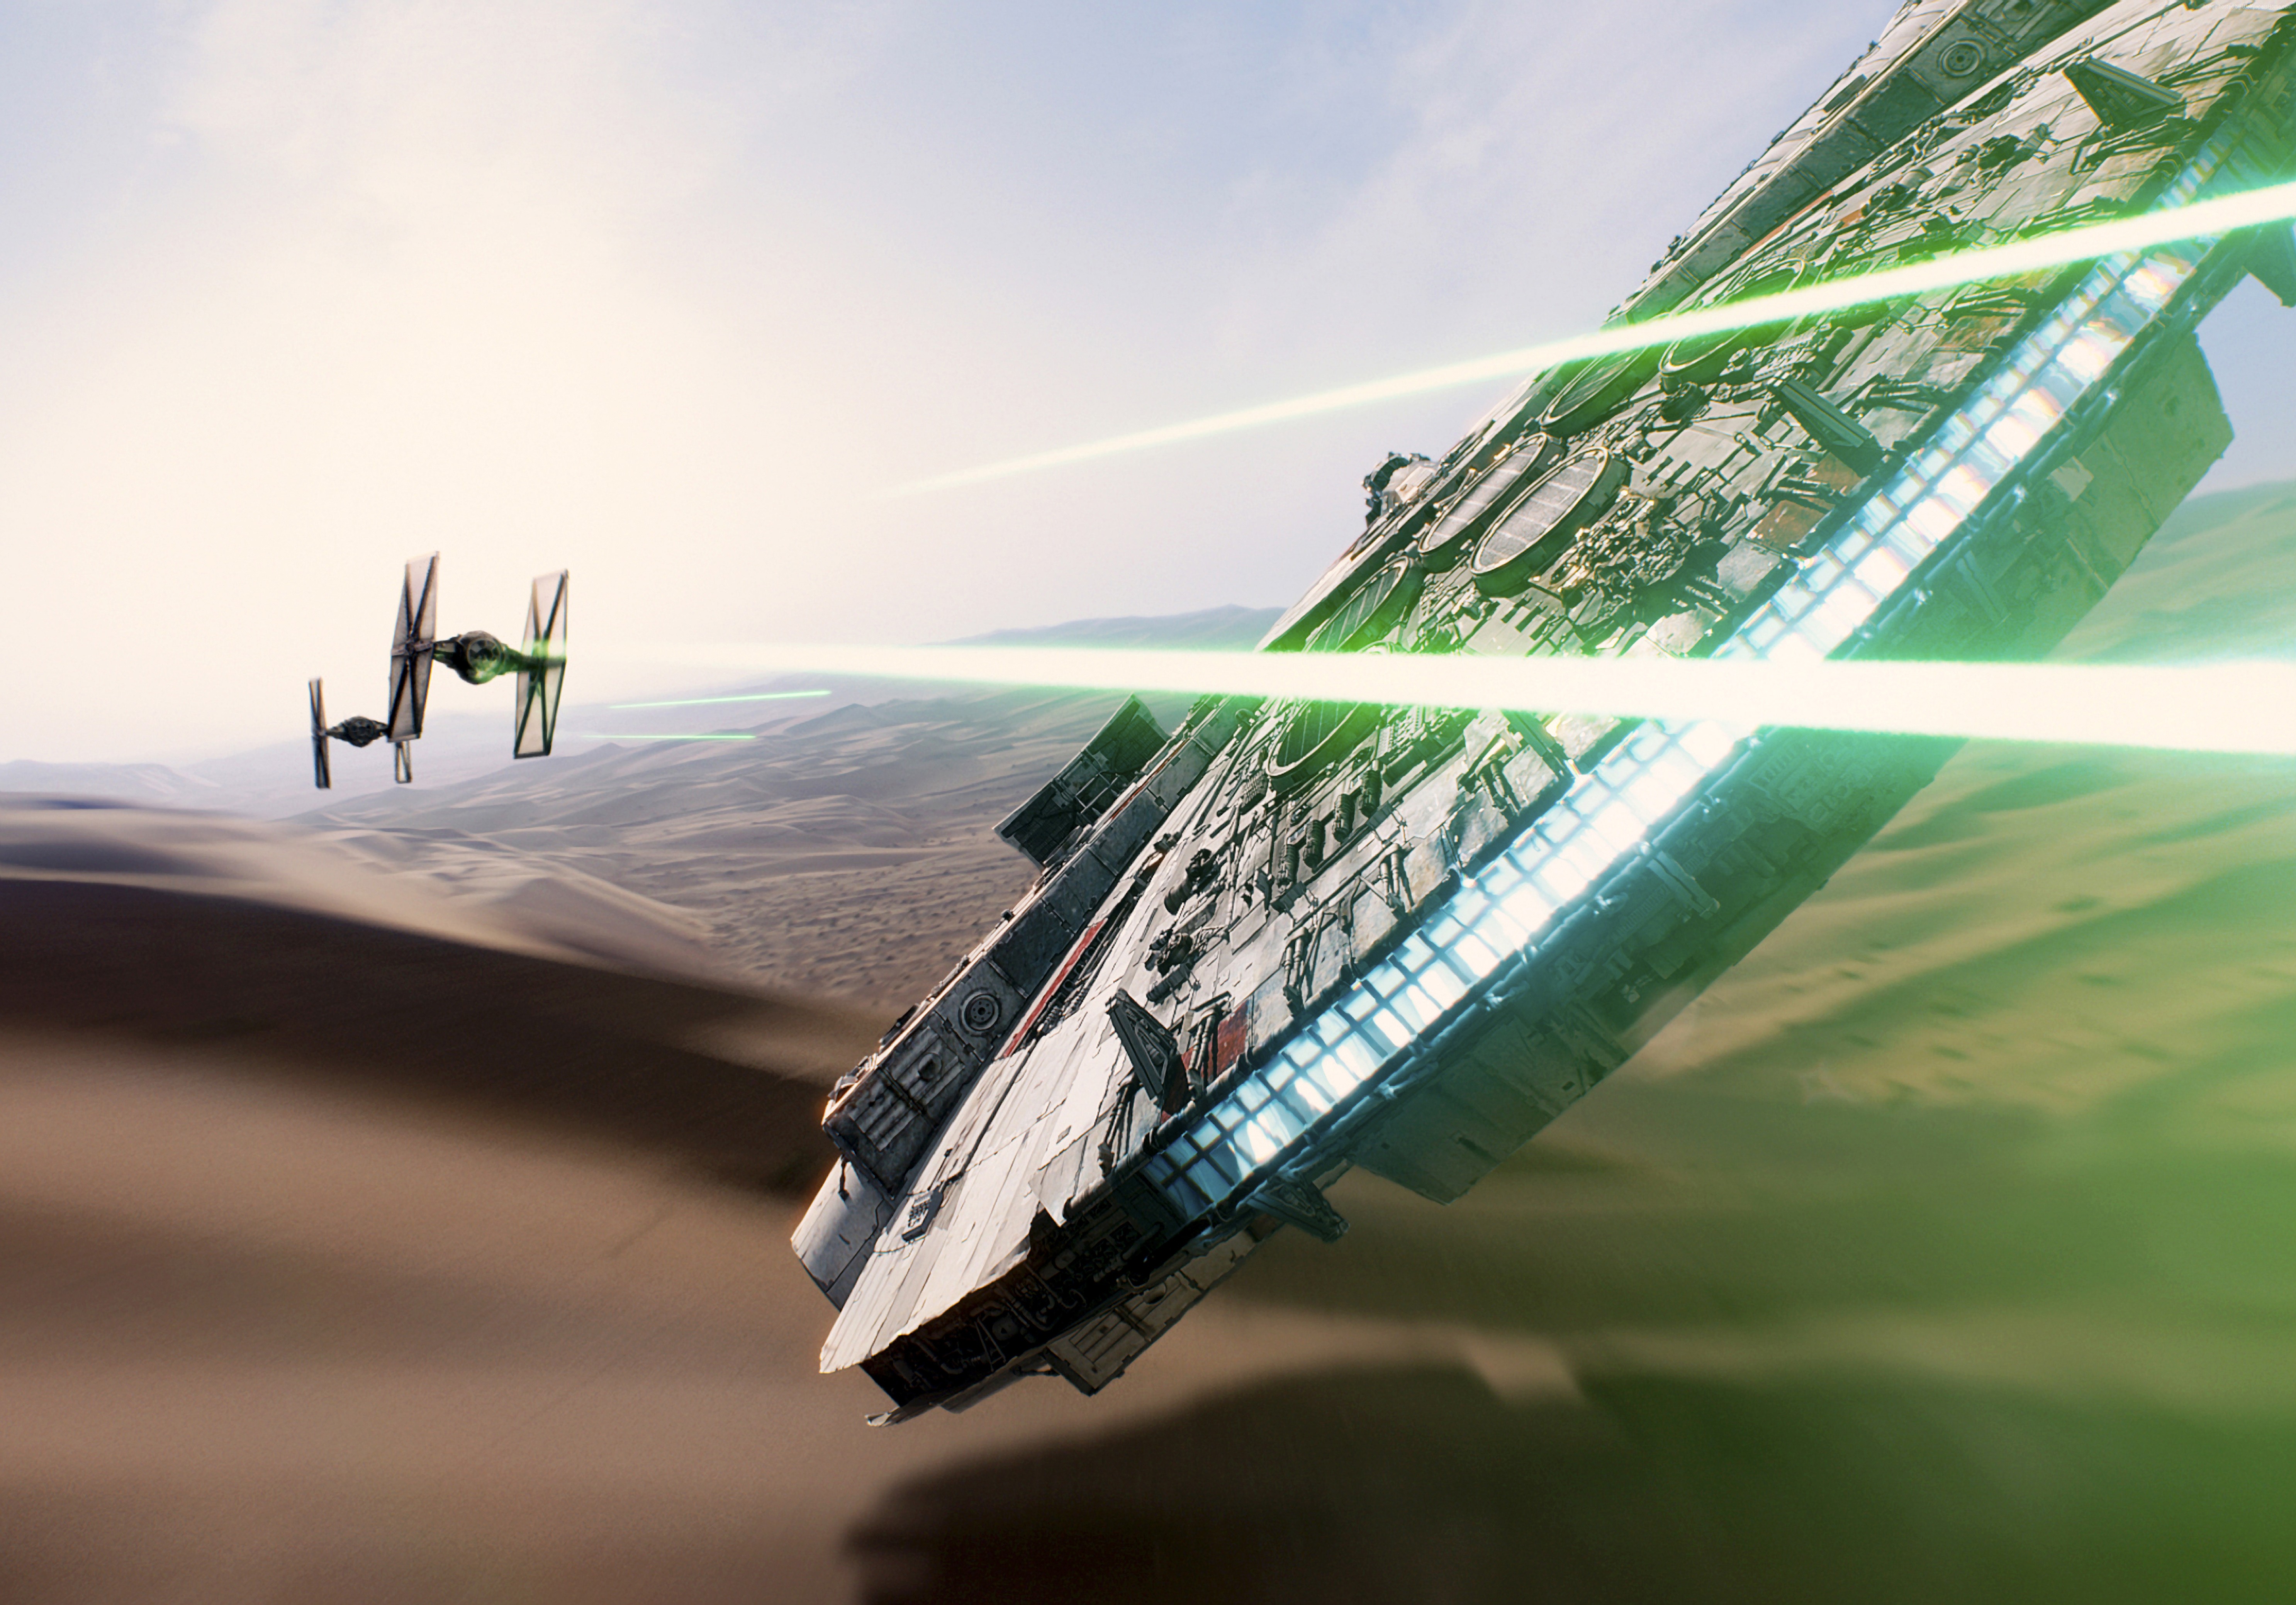 165 Star Wars Episode VII The Force Awakens HD Wallpapers